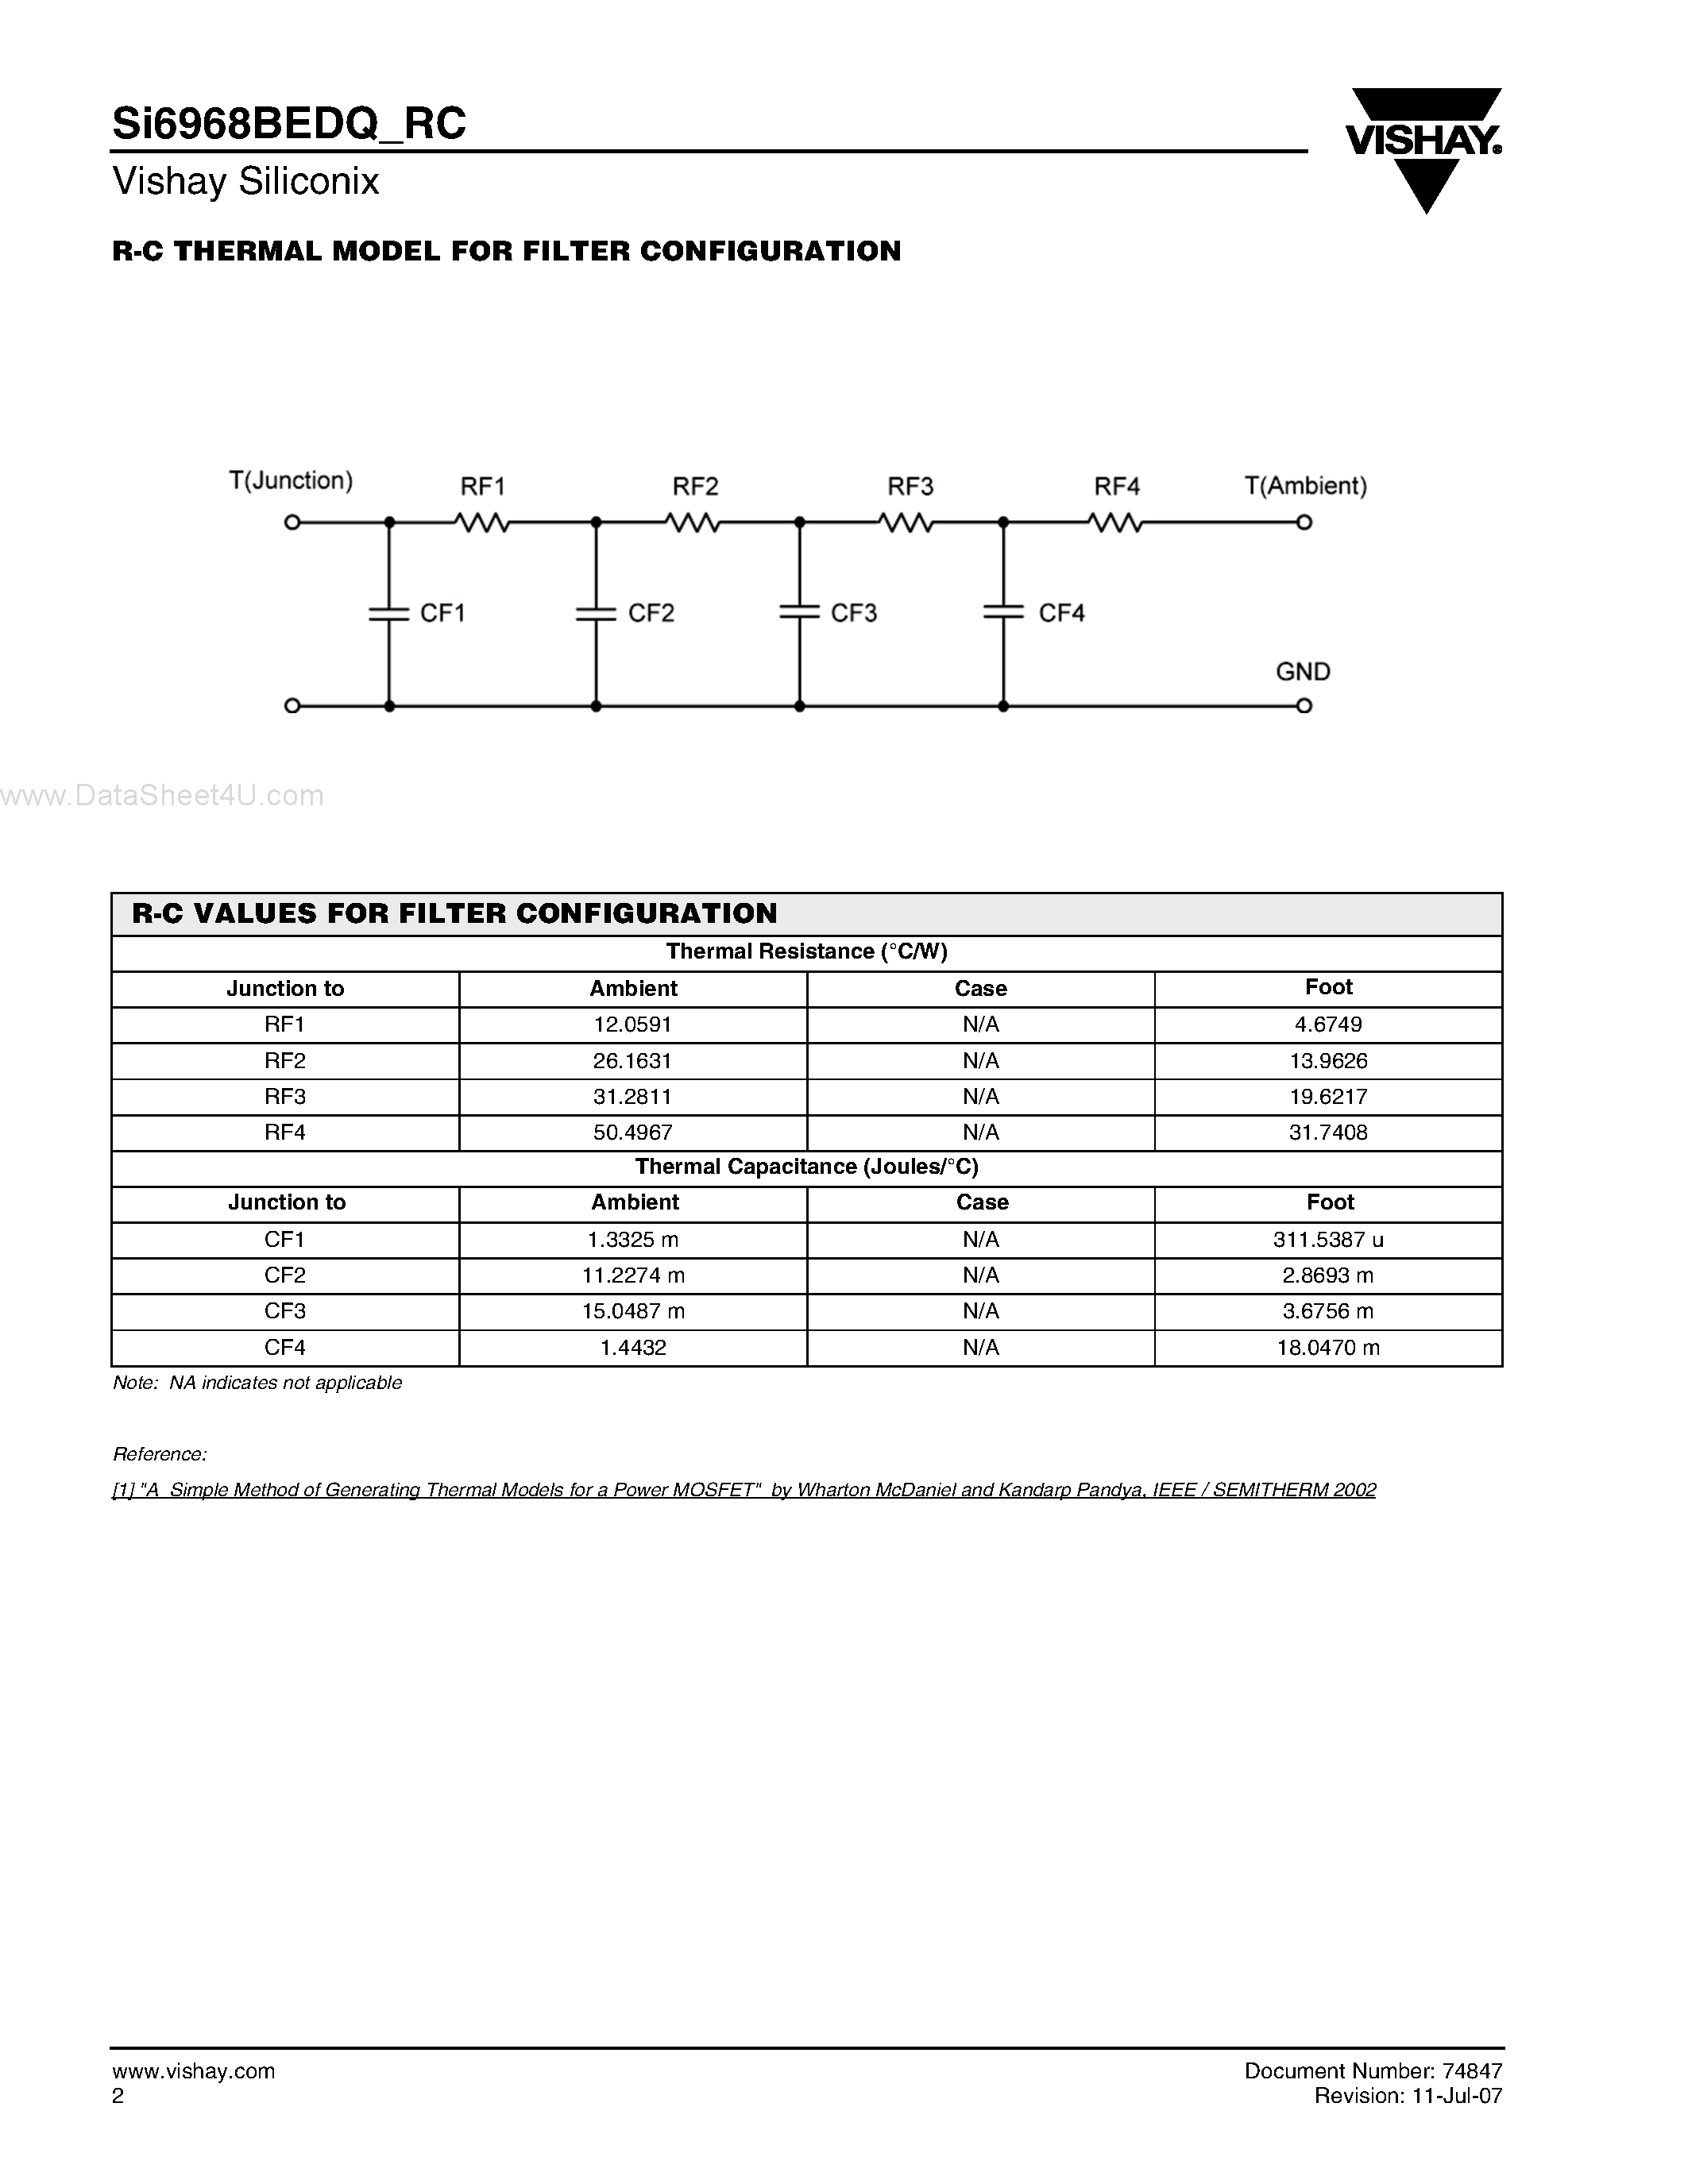 Datasheet SI6968BEDQ_RC - R-C Thermal Model Parameters page 2